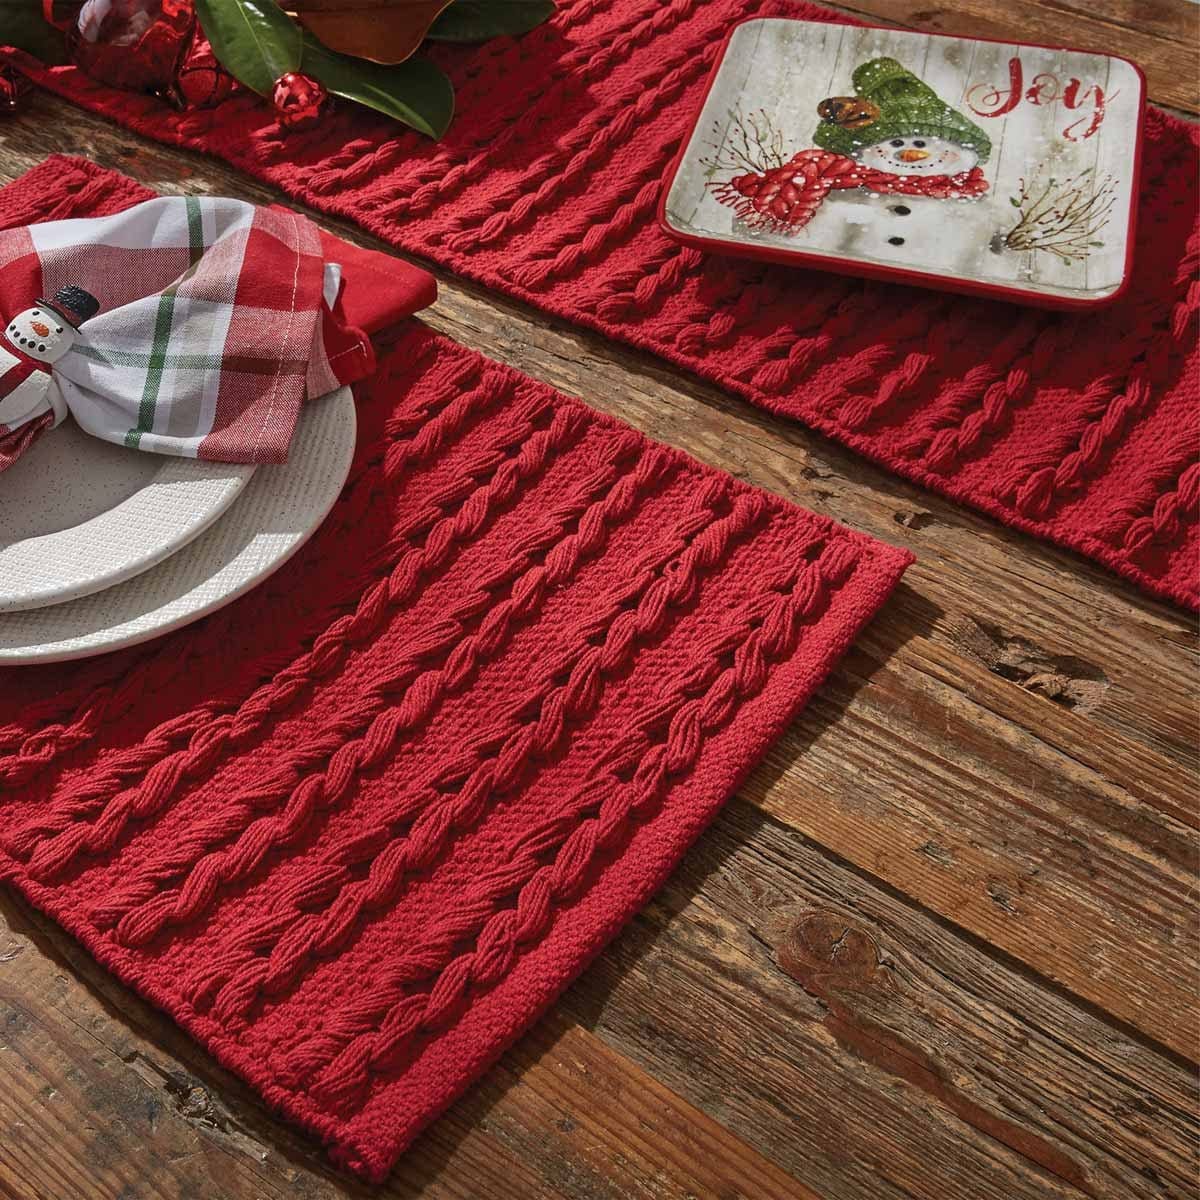 Winter Scarf Red Table Runner 54" Long-Park Designs-The Village Merchant